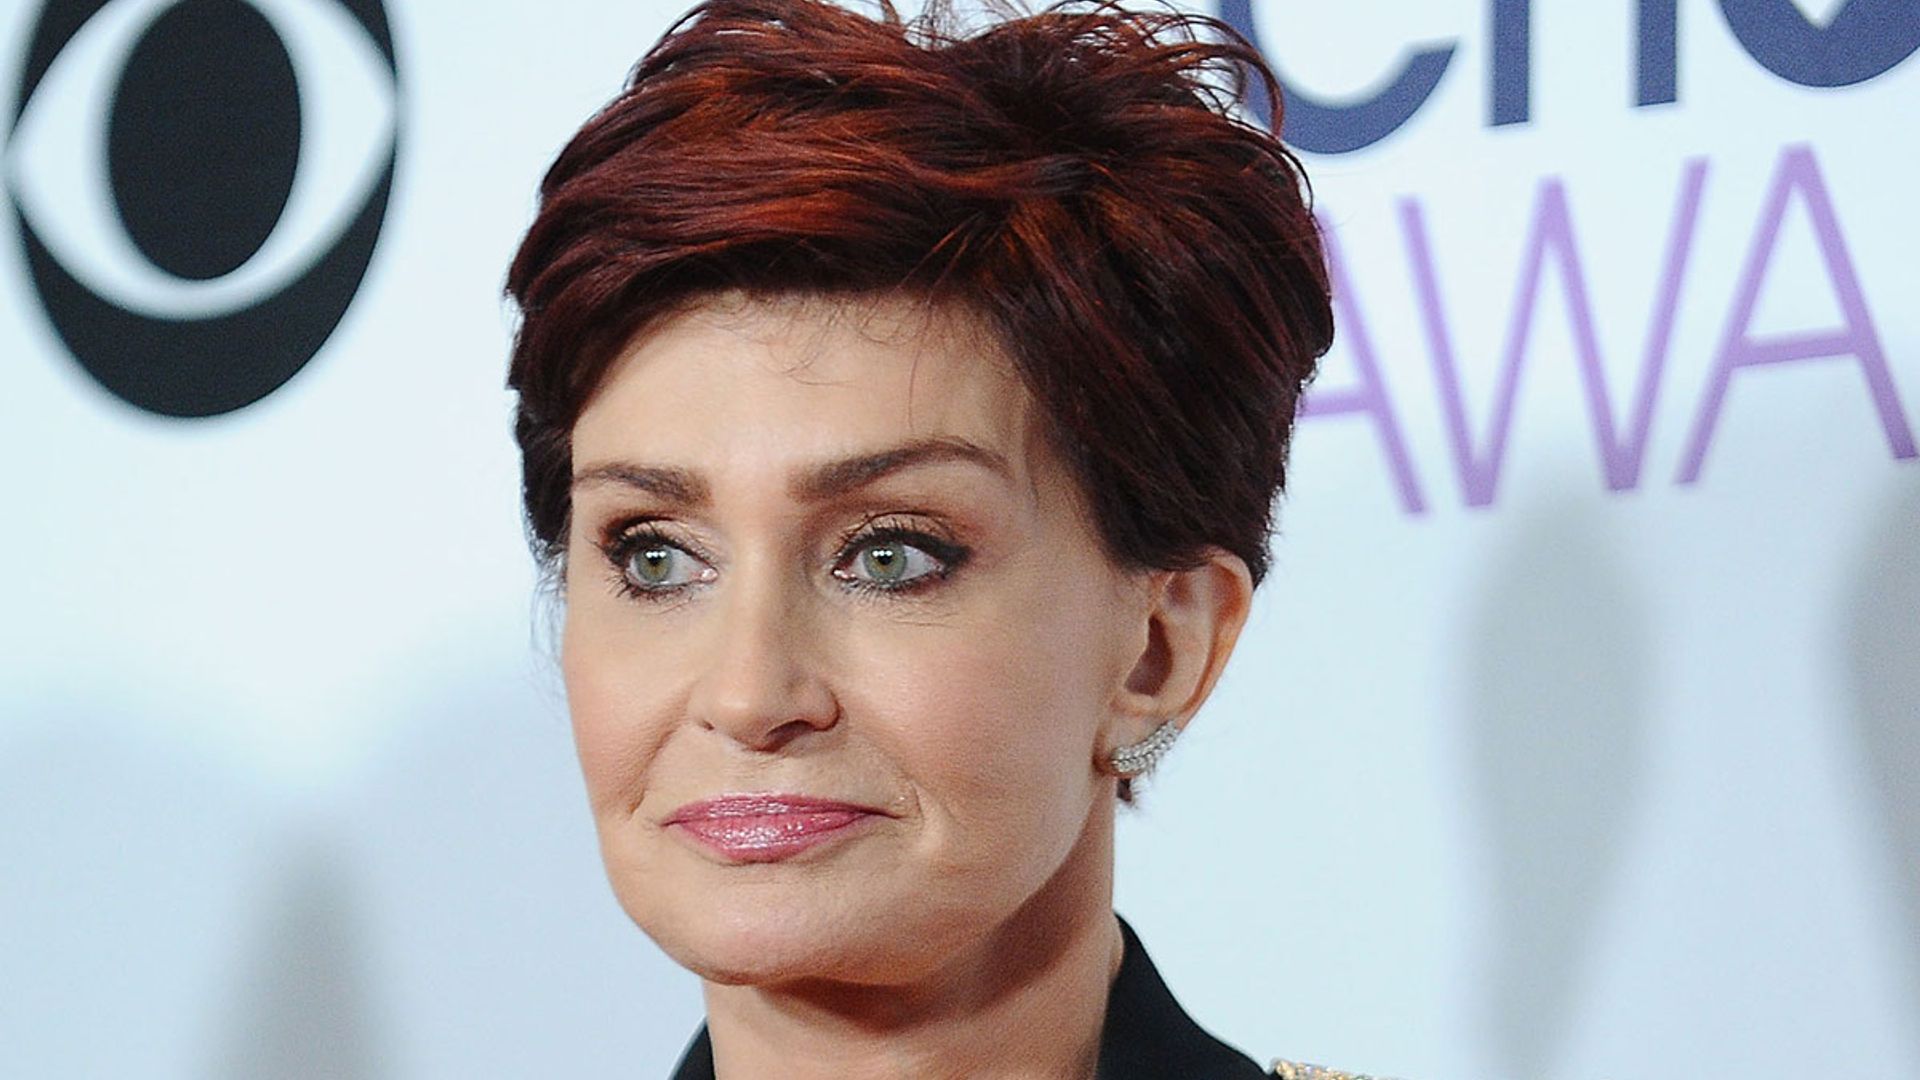 Sharon Osbourne reveals daughter Aimee's brush with death after terrifying fire –'Today was beyond horrific'